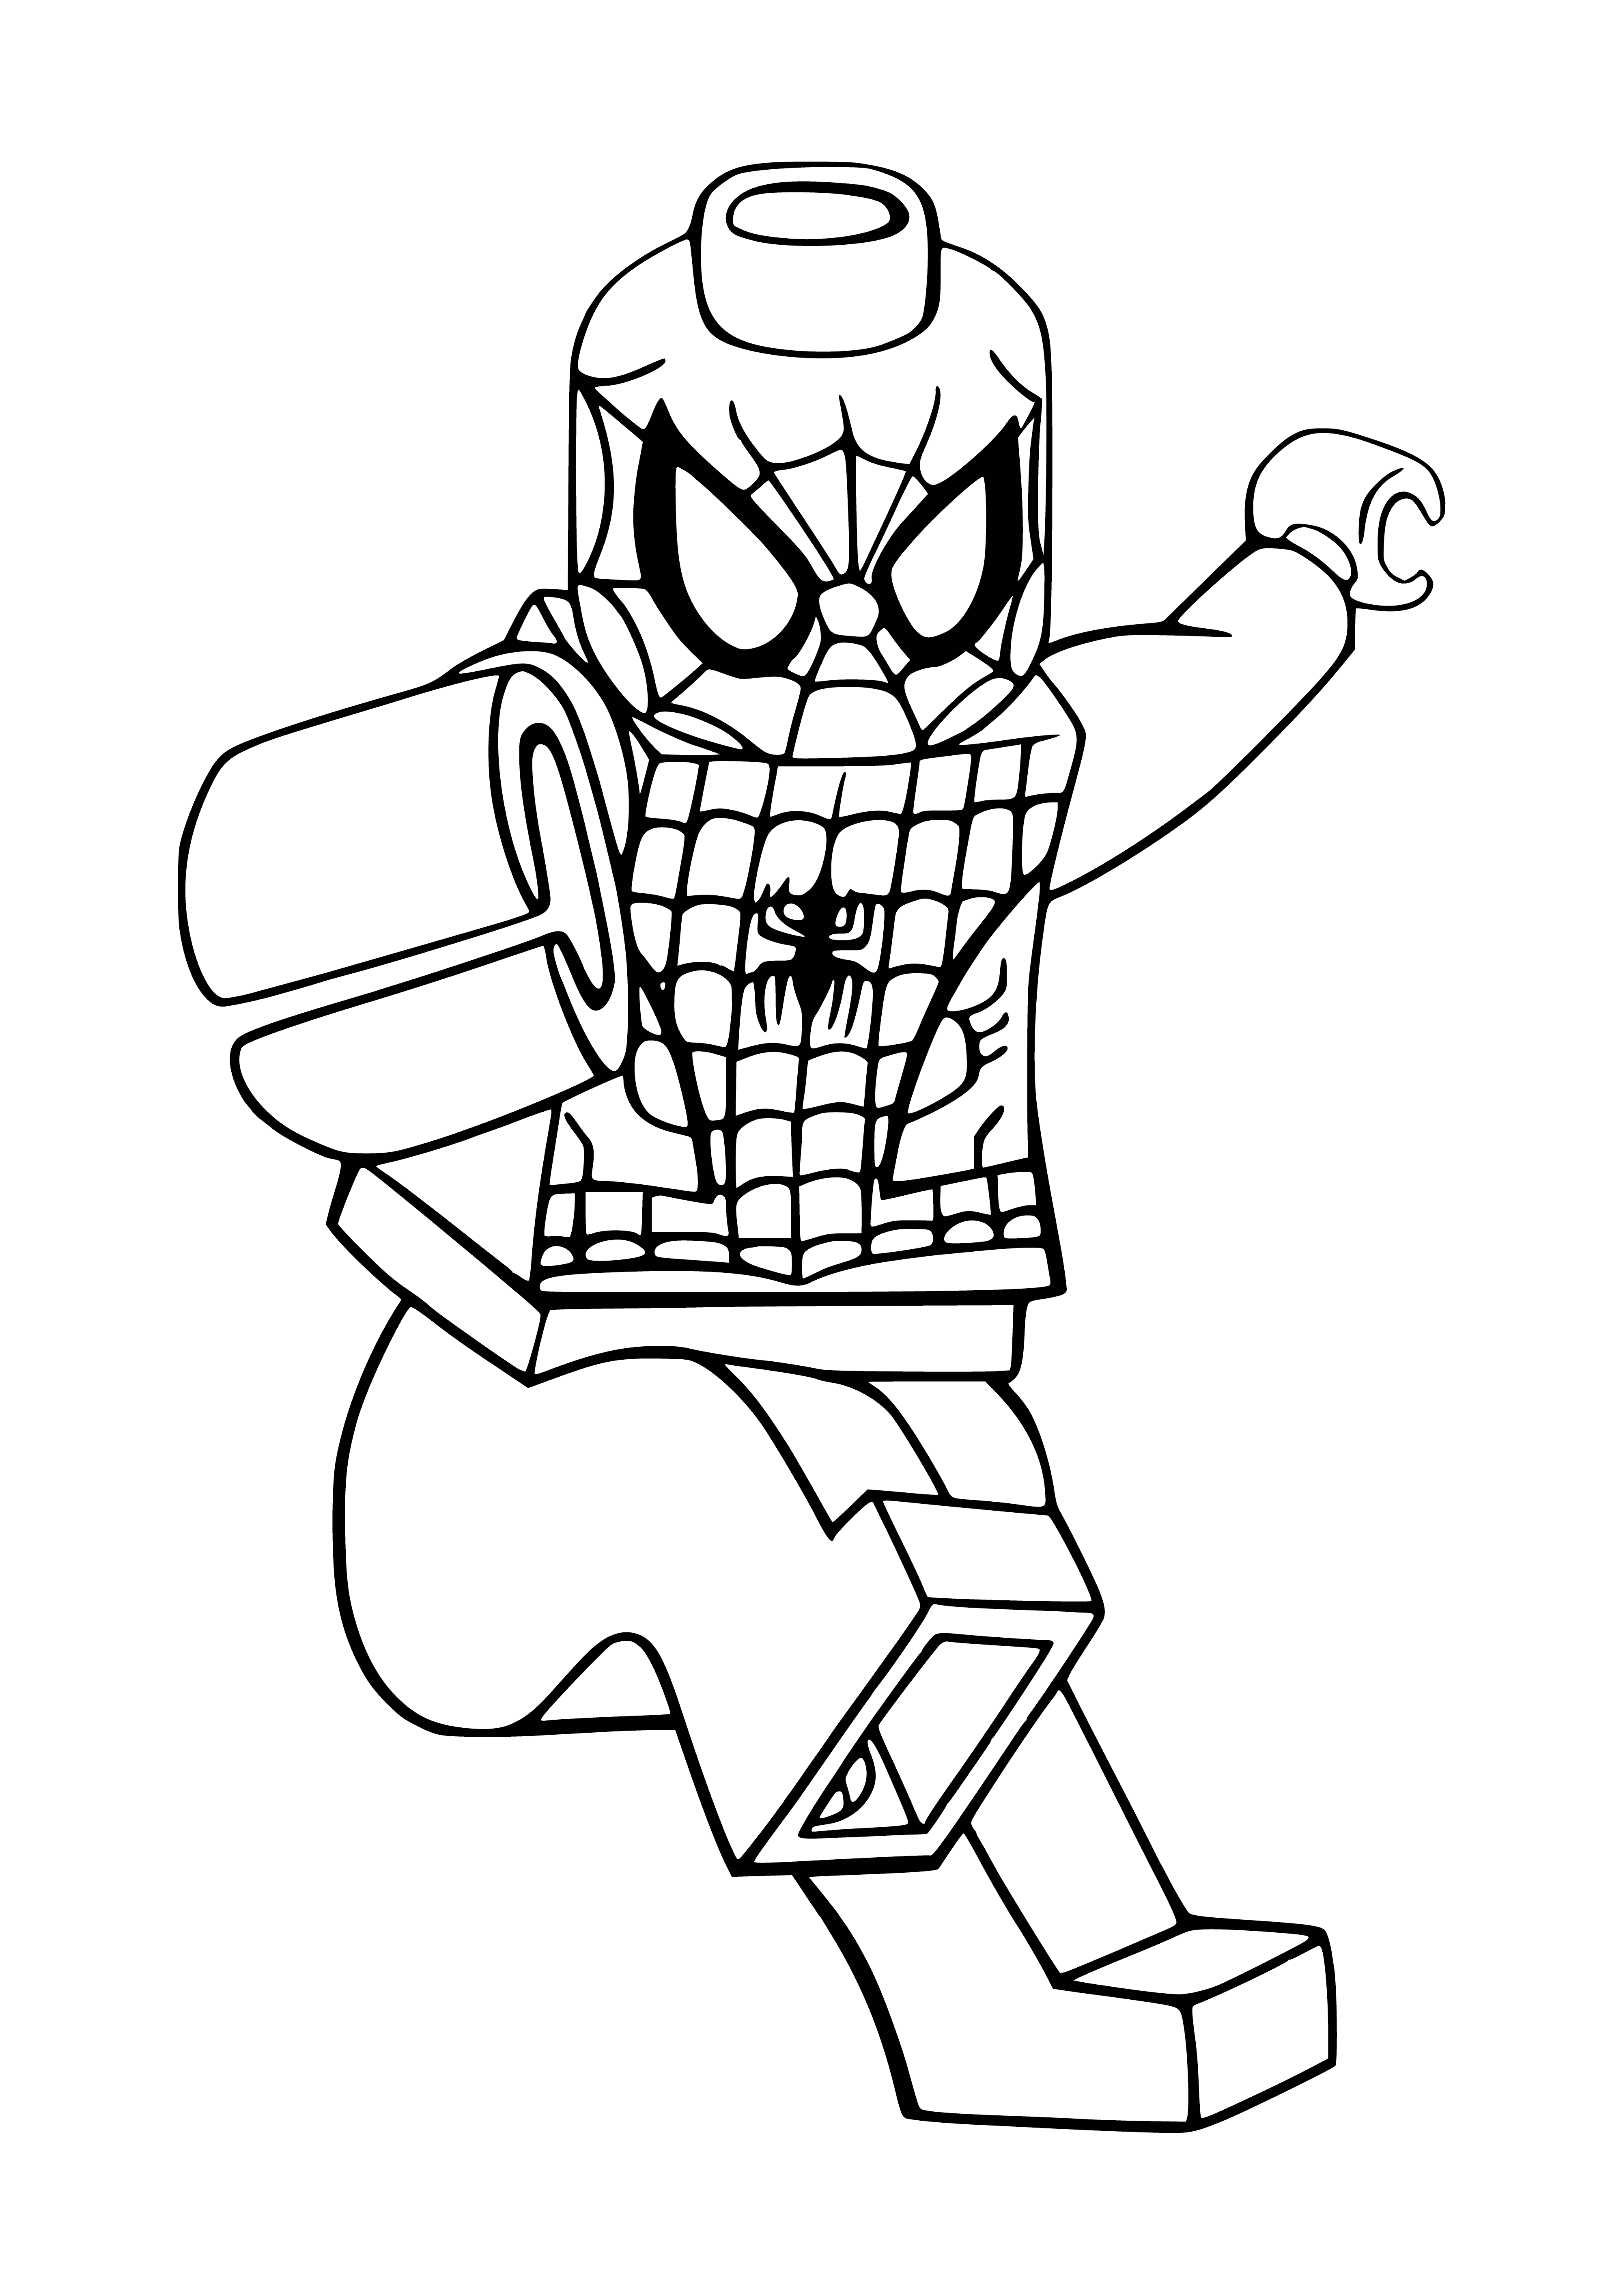 coloring page: Lego Spiderman figurine in red/blue suit w/ black logo. White eyes, red spider-like legs. Standing on black base.